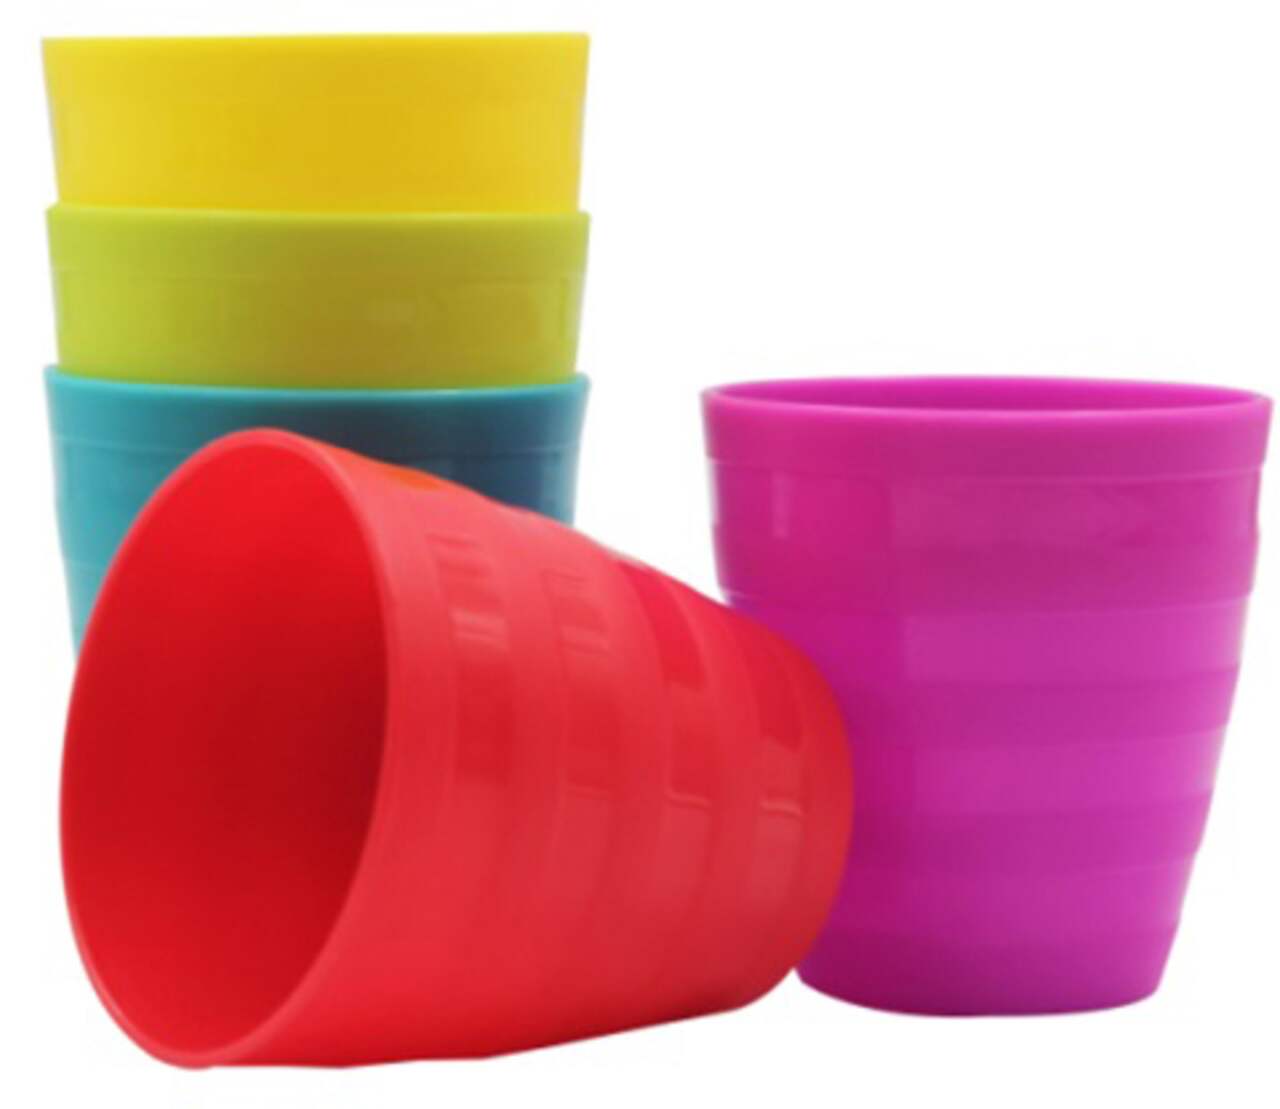 8 oz Kids Cups,Set of 20 Small Plastic Cups for Kids,BPA Free  Cups,Dishwasher Safe,Reusable and Unbreakable Children Drinking Cups  Tumblers in 5